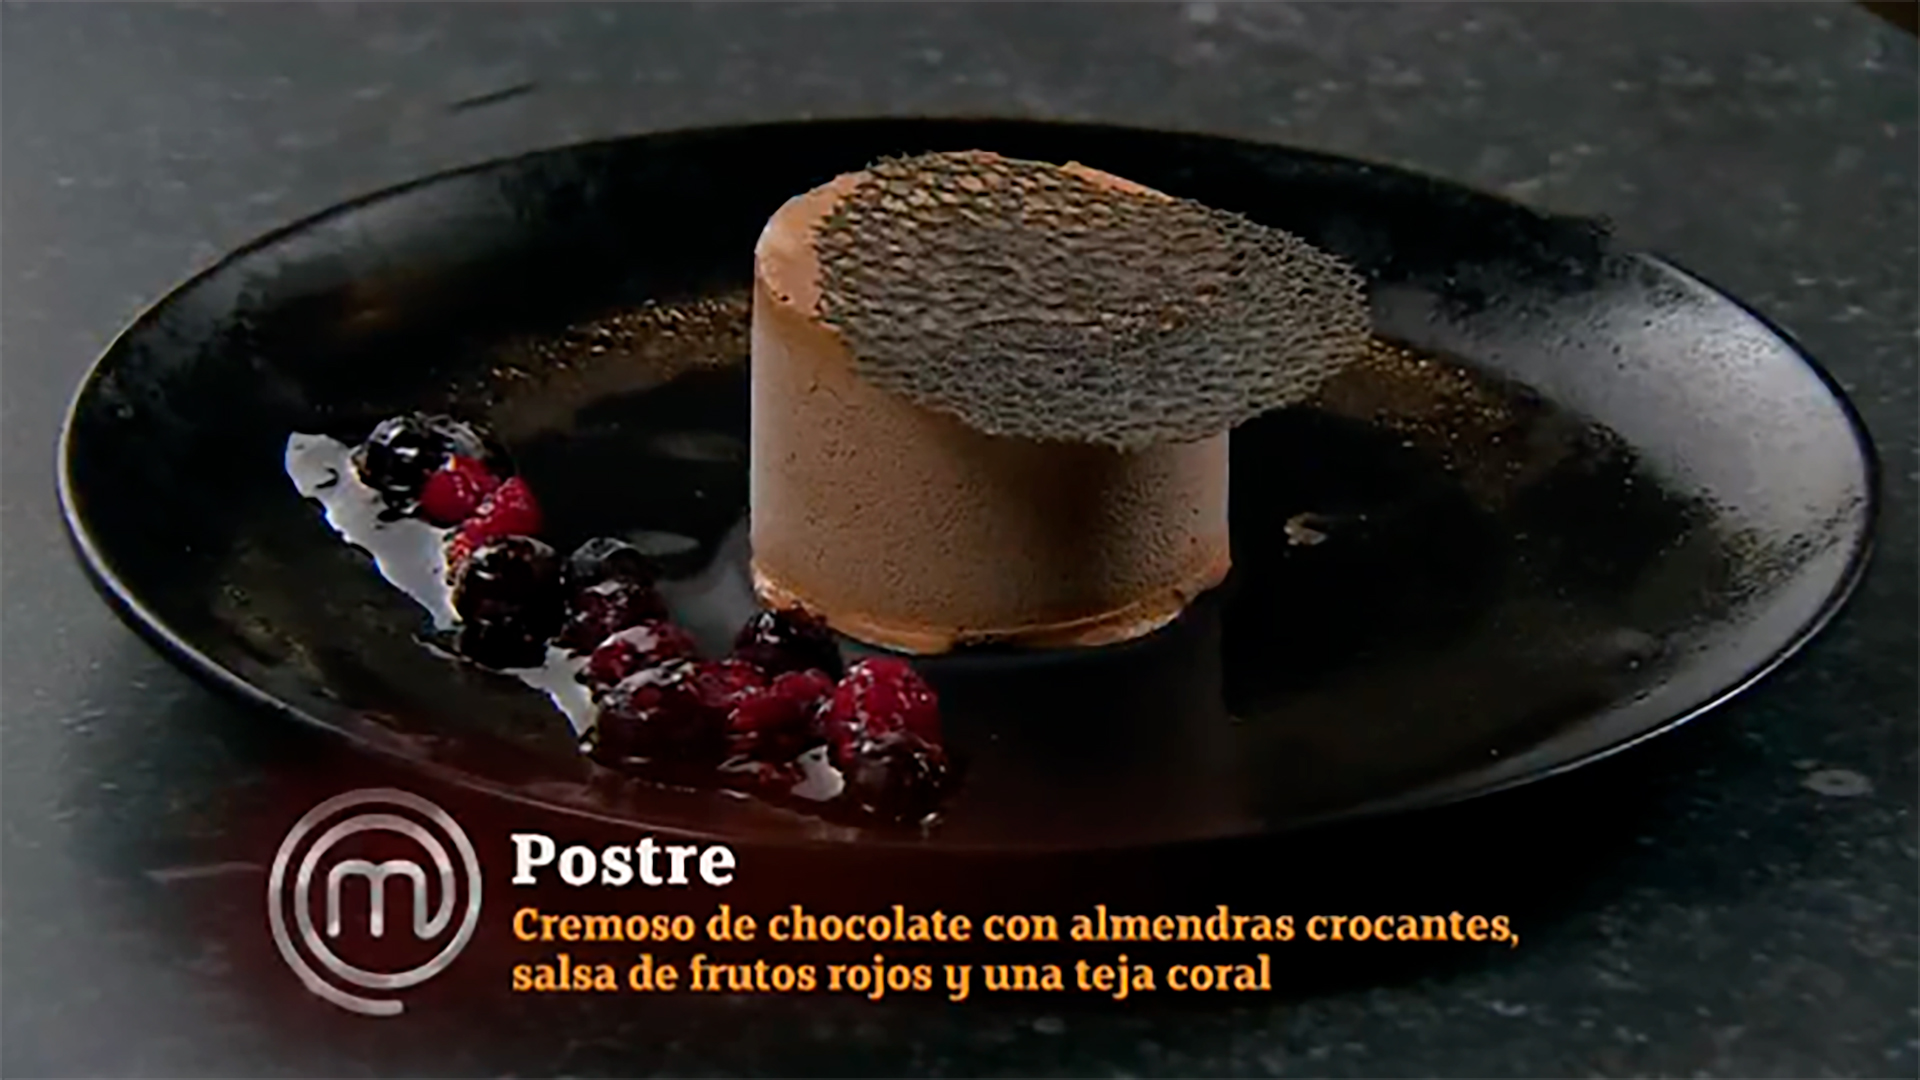 The dessert that Mica Viciconte presented during the Masterchef Celebrity 3 finale